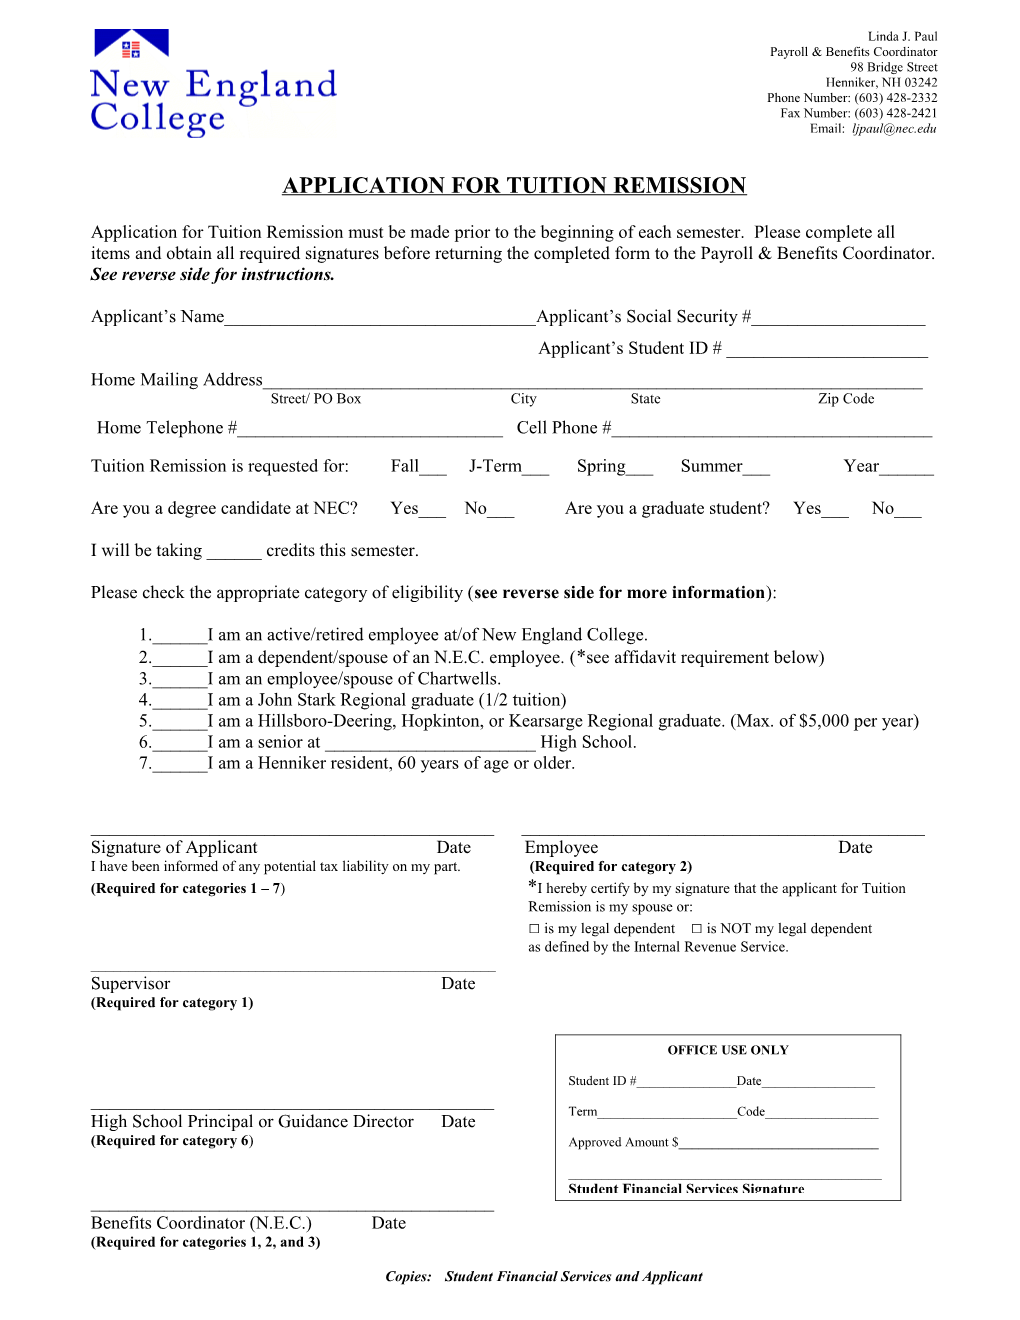 Application for Tuition Remission